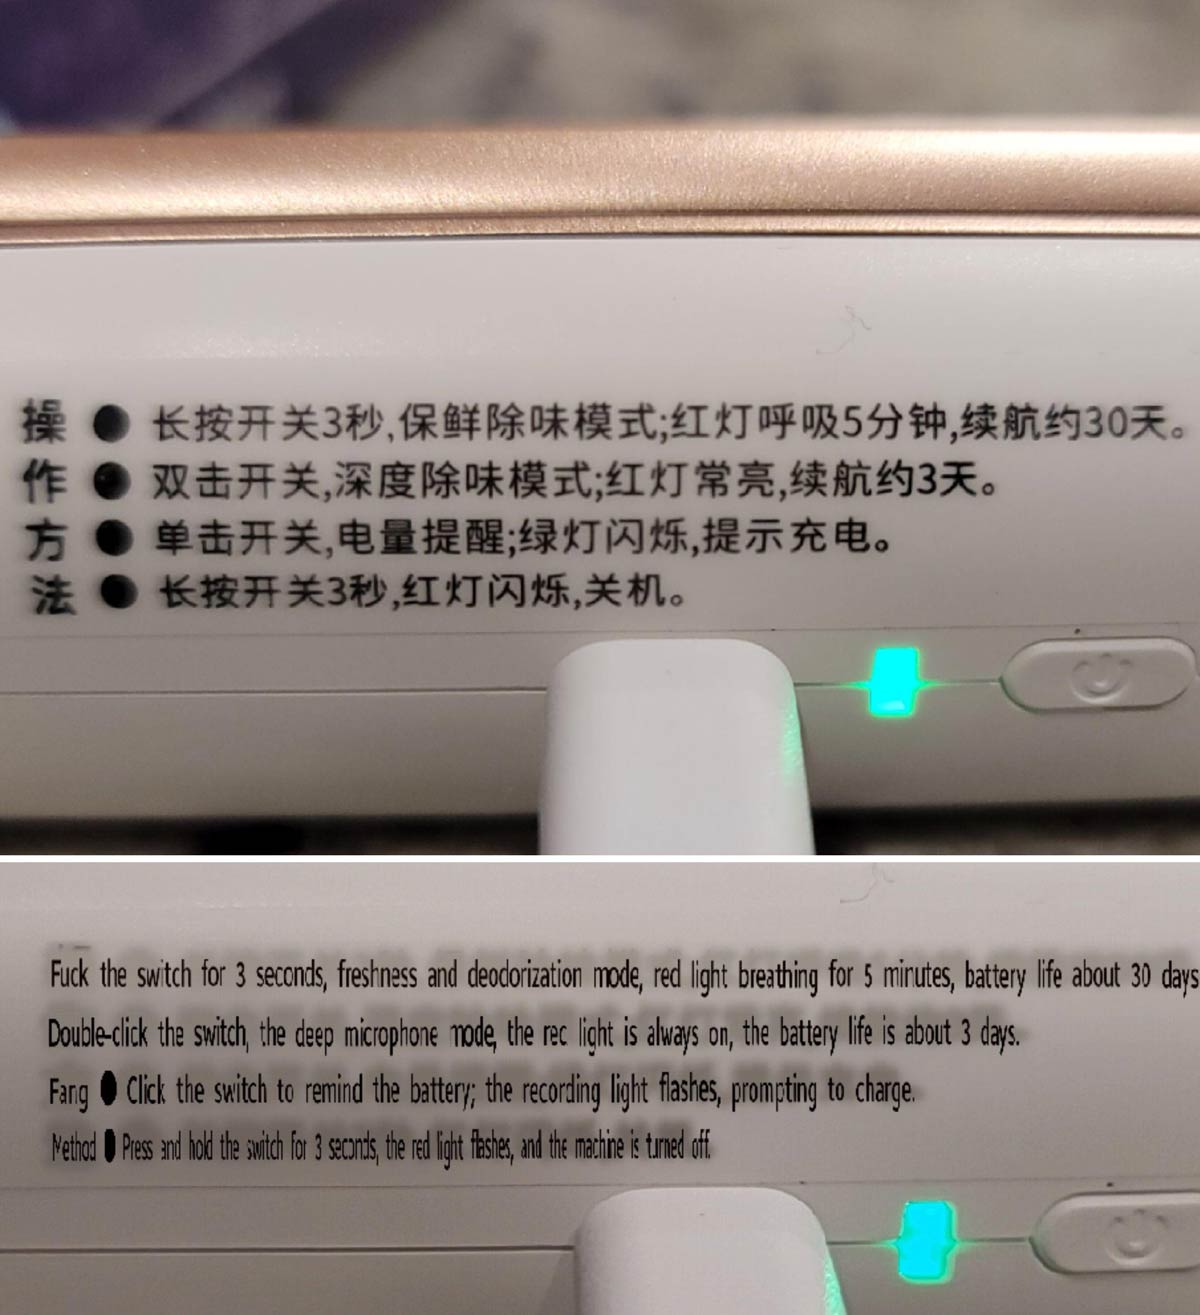 I used Google translate for the instructions on my refrigerator deodorizer